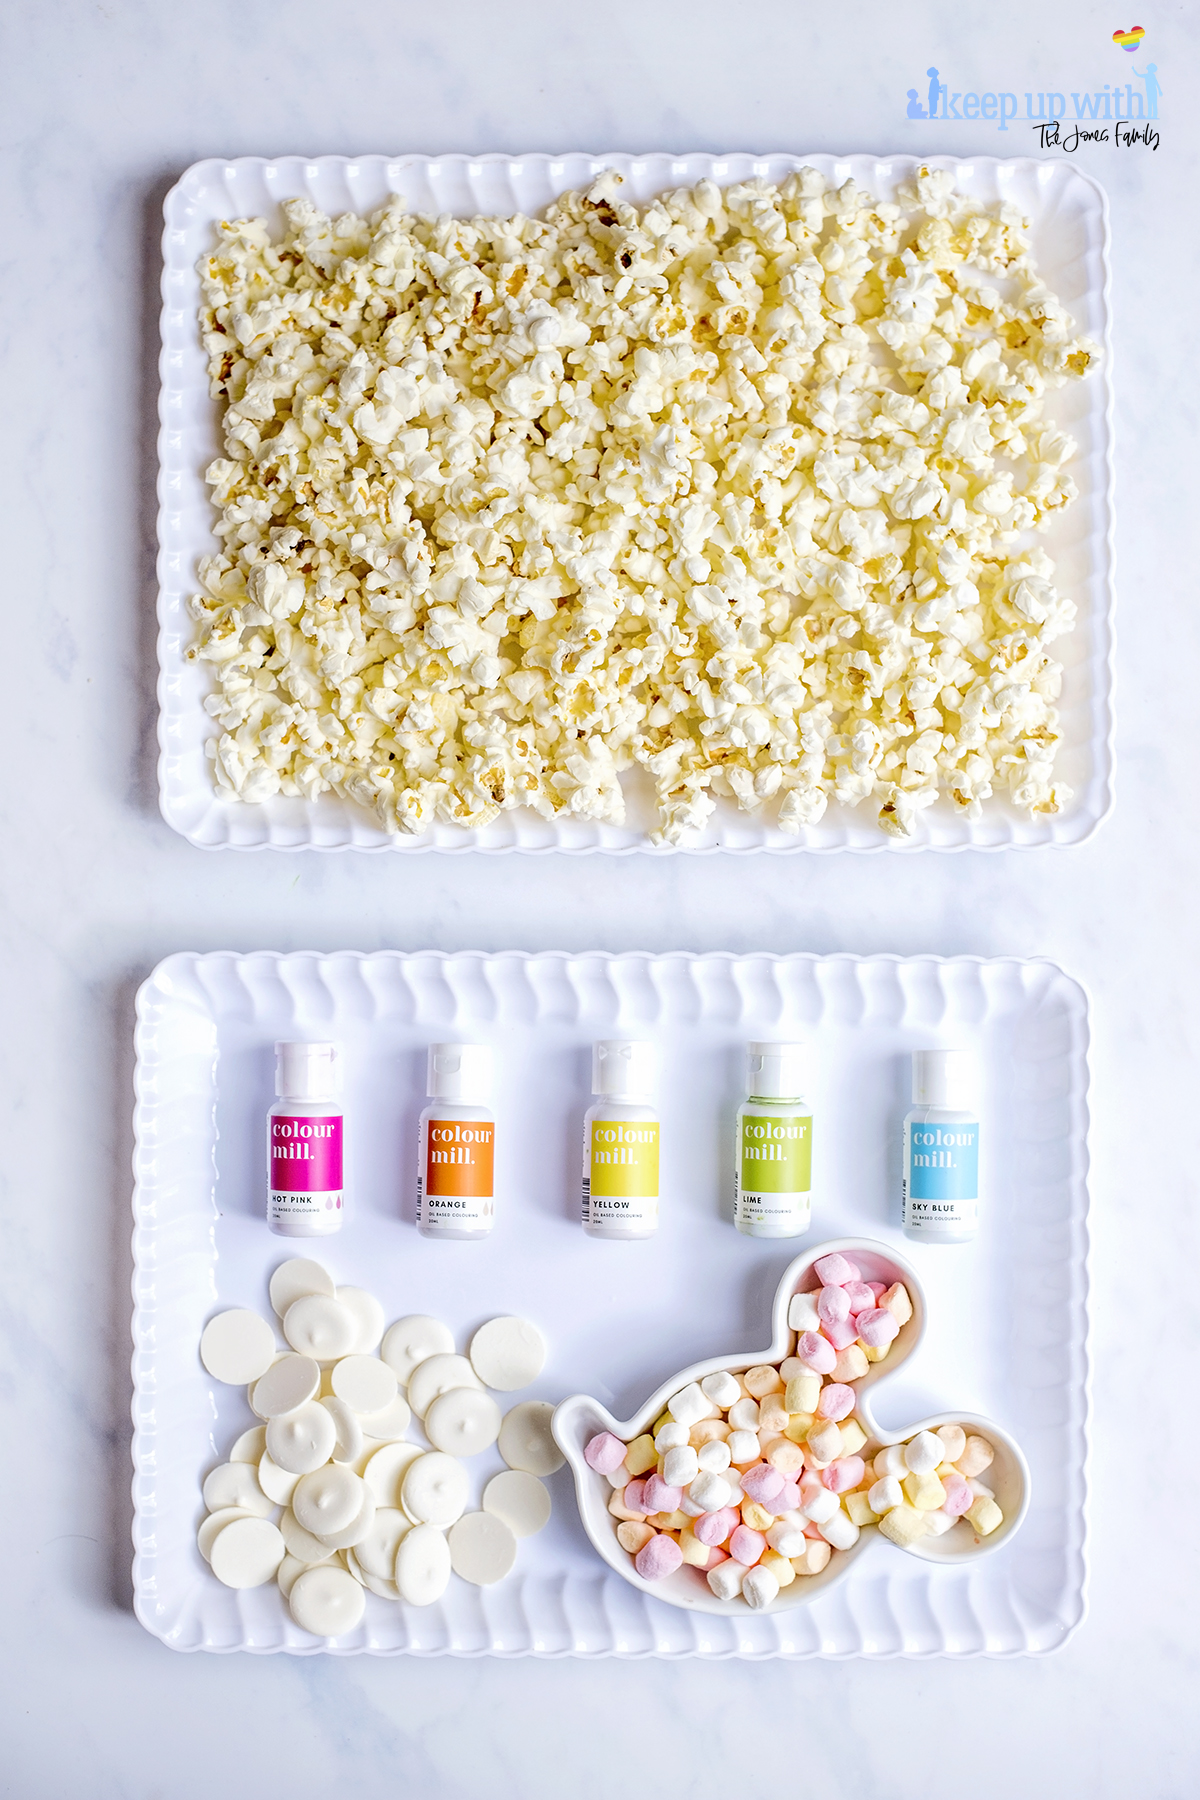 Image shows the ingredients used to make Mermaid Popcorn. Popcorn, spread evenly into a white scalloped tray, a pile of bright white candy melts, a mickey mouse shaped bowl of mini marshmallows and oil based food colourings from Colour Mill. Image by Sara-Jayne from keep Up With the Jones family.